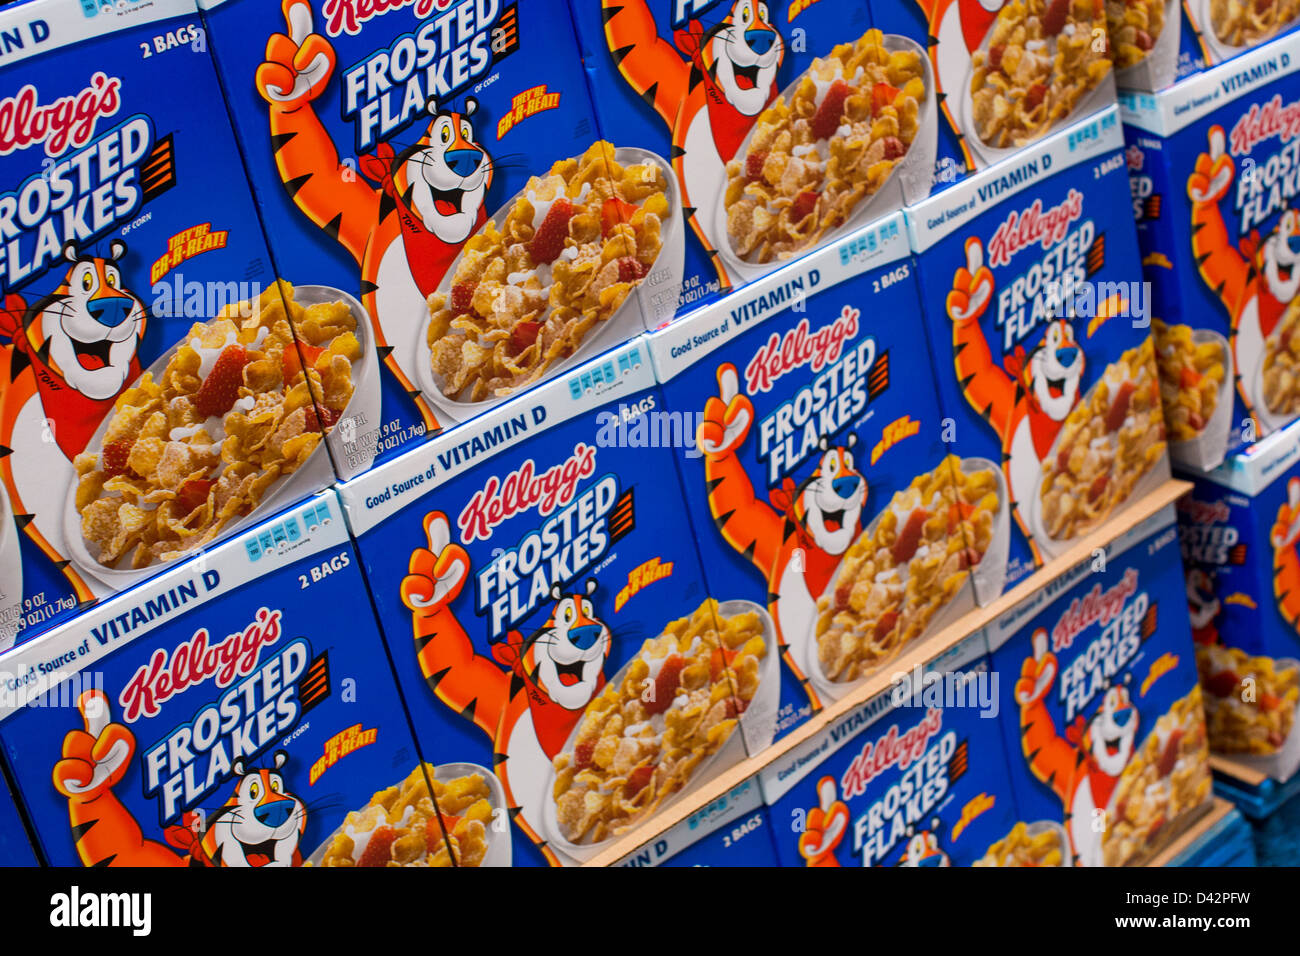 Kellog's Frosted Flakes cereal on display at a Costco Wholesale Warehouse Club. Stock Photo